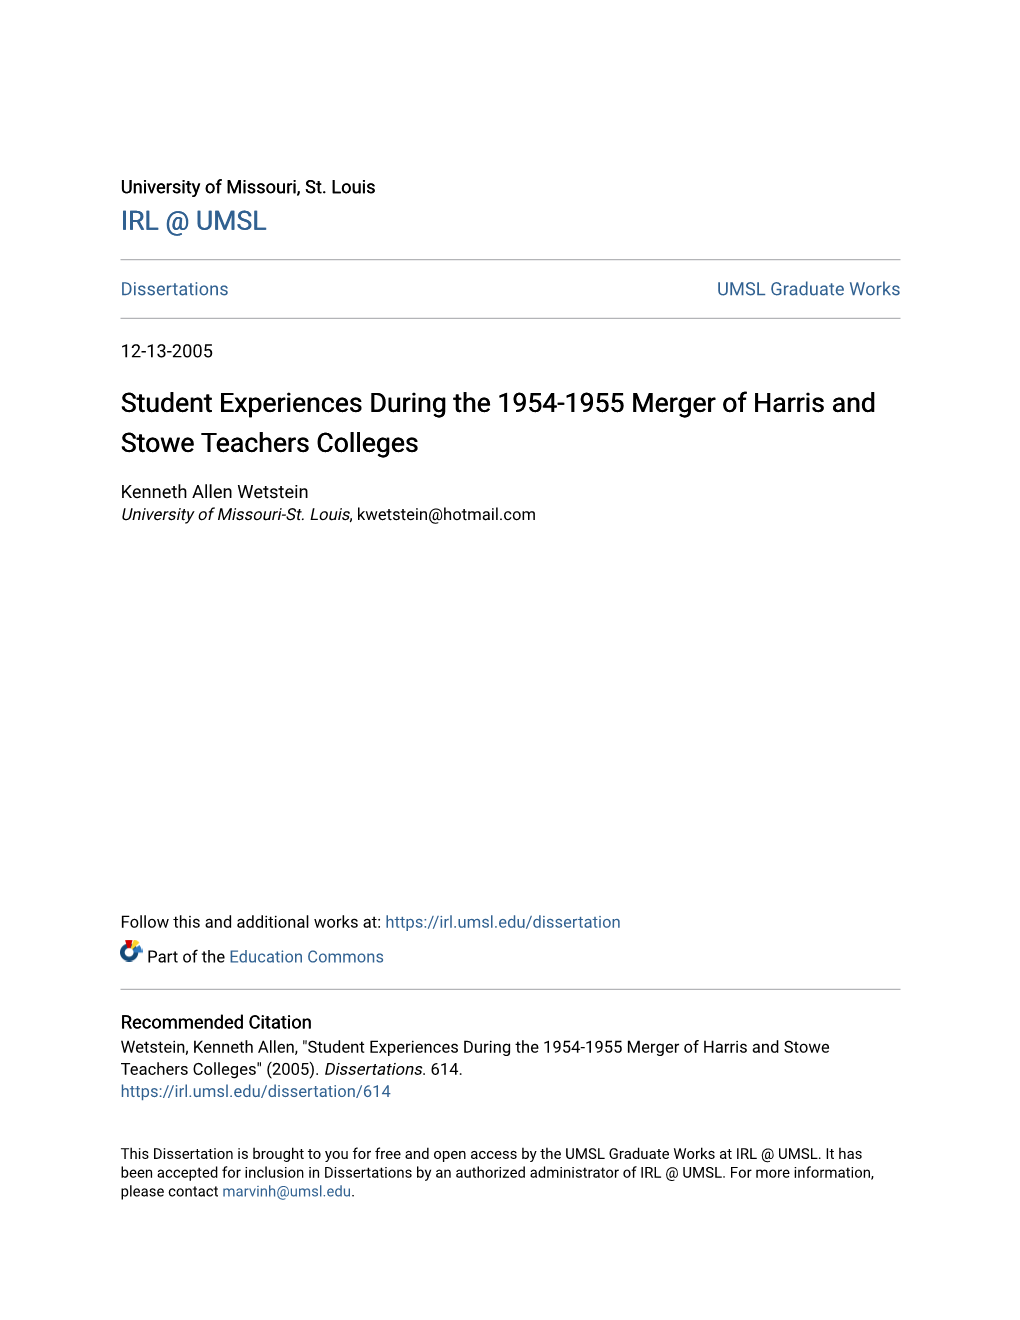 Student Experiences During the 1954-1955 Merger of Harris and Stowe Teachers Colleges